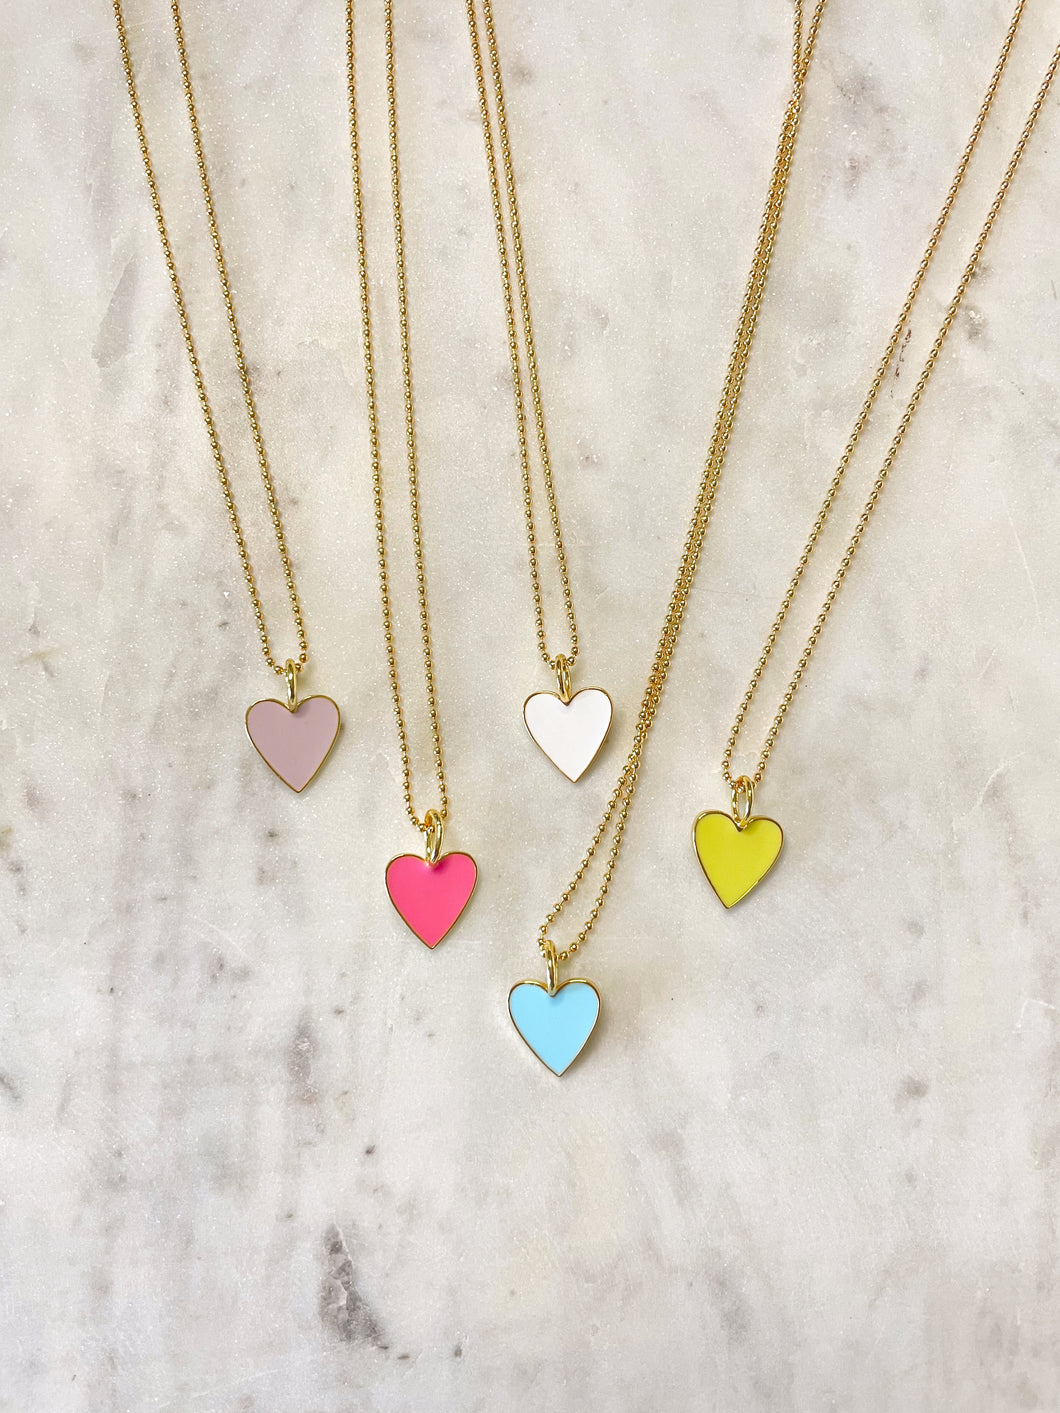 Necklace 💗💚🧡💜💙🖤